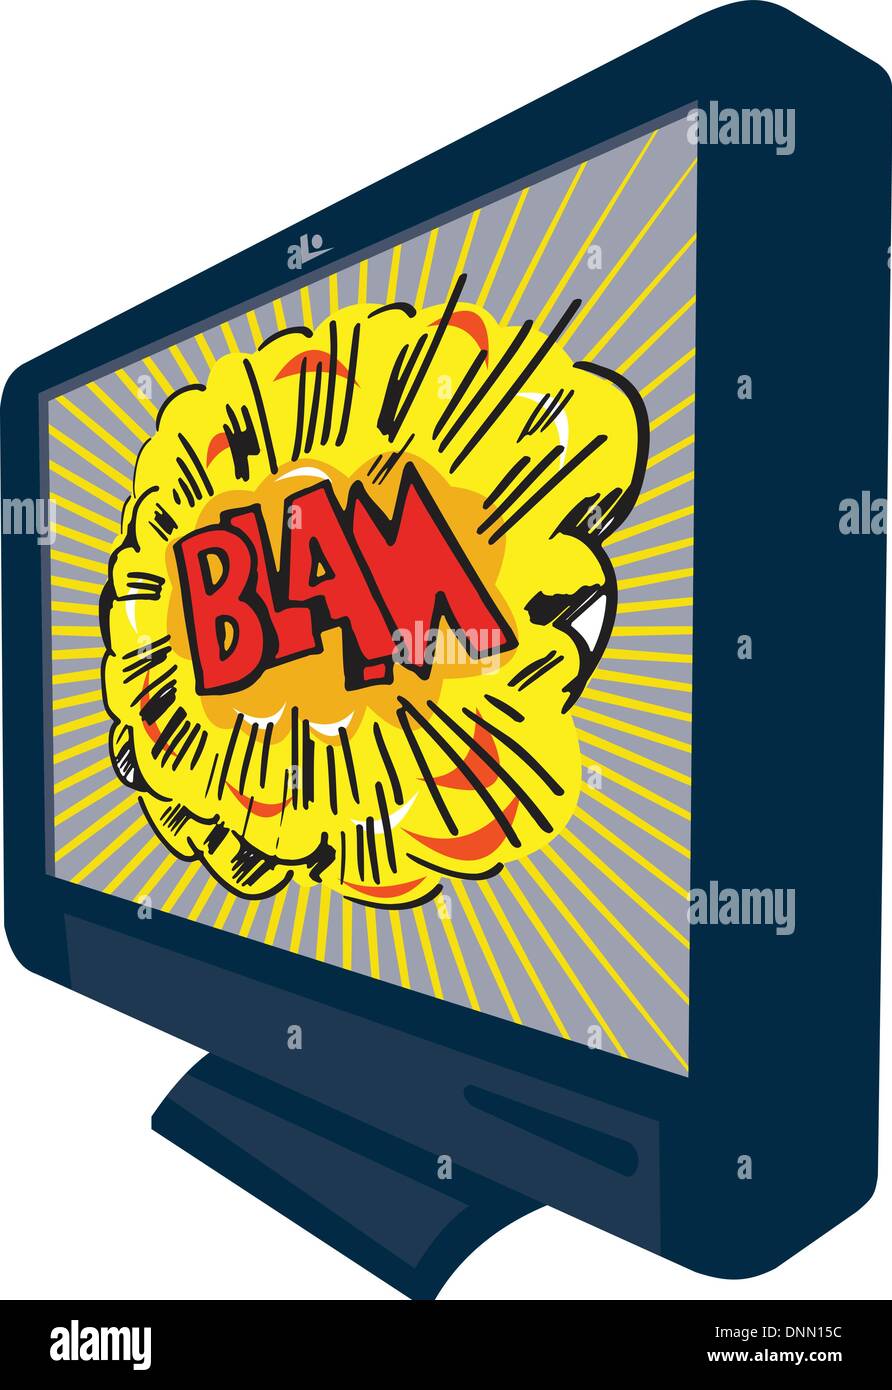 Illustration of an LCD Plasma television TV set on isolated white background with cartoon style explosion and text word blam. Stock Vector